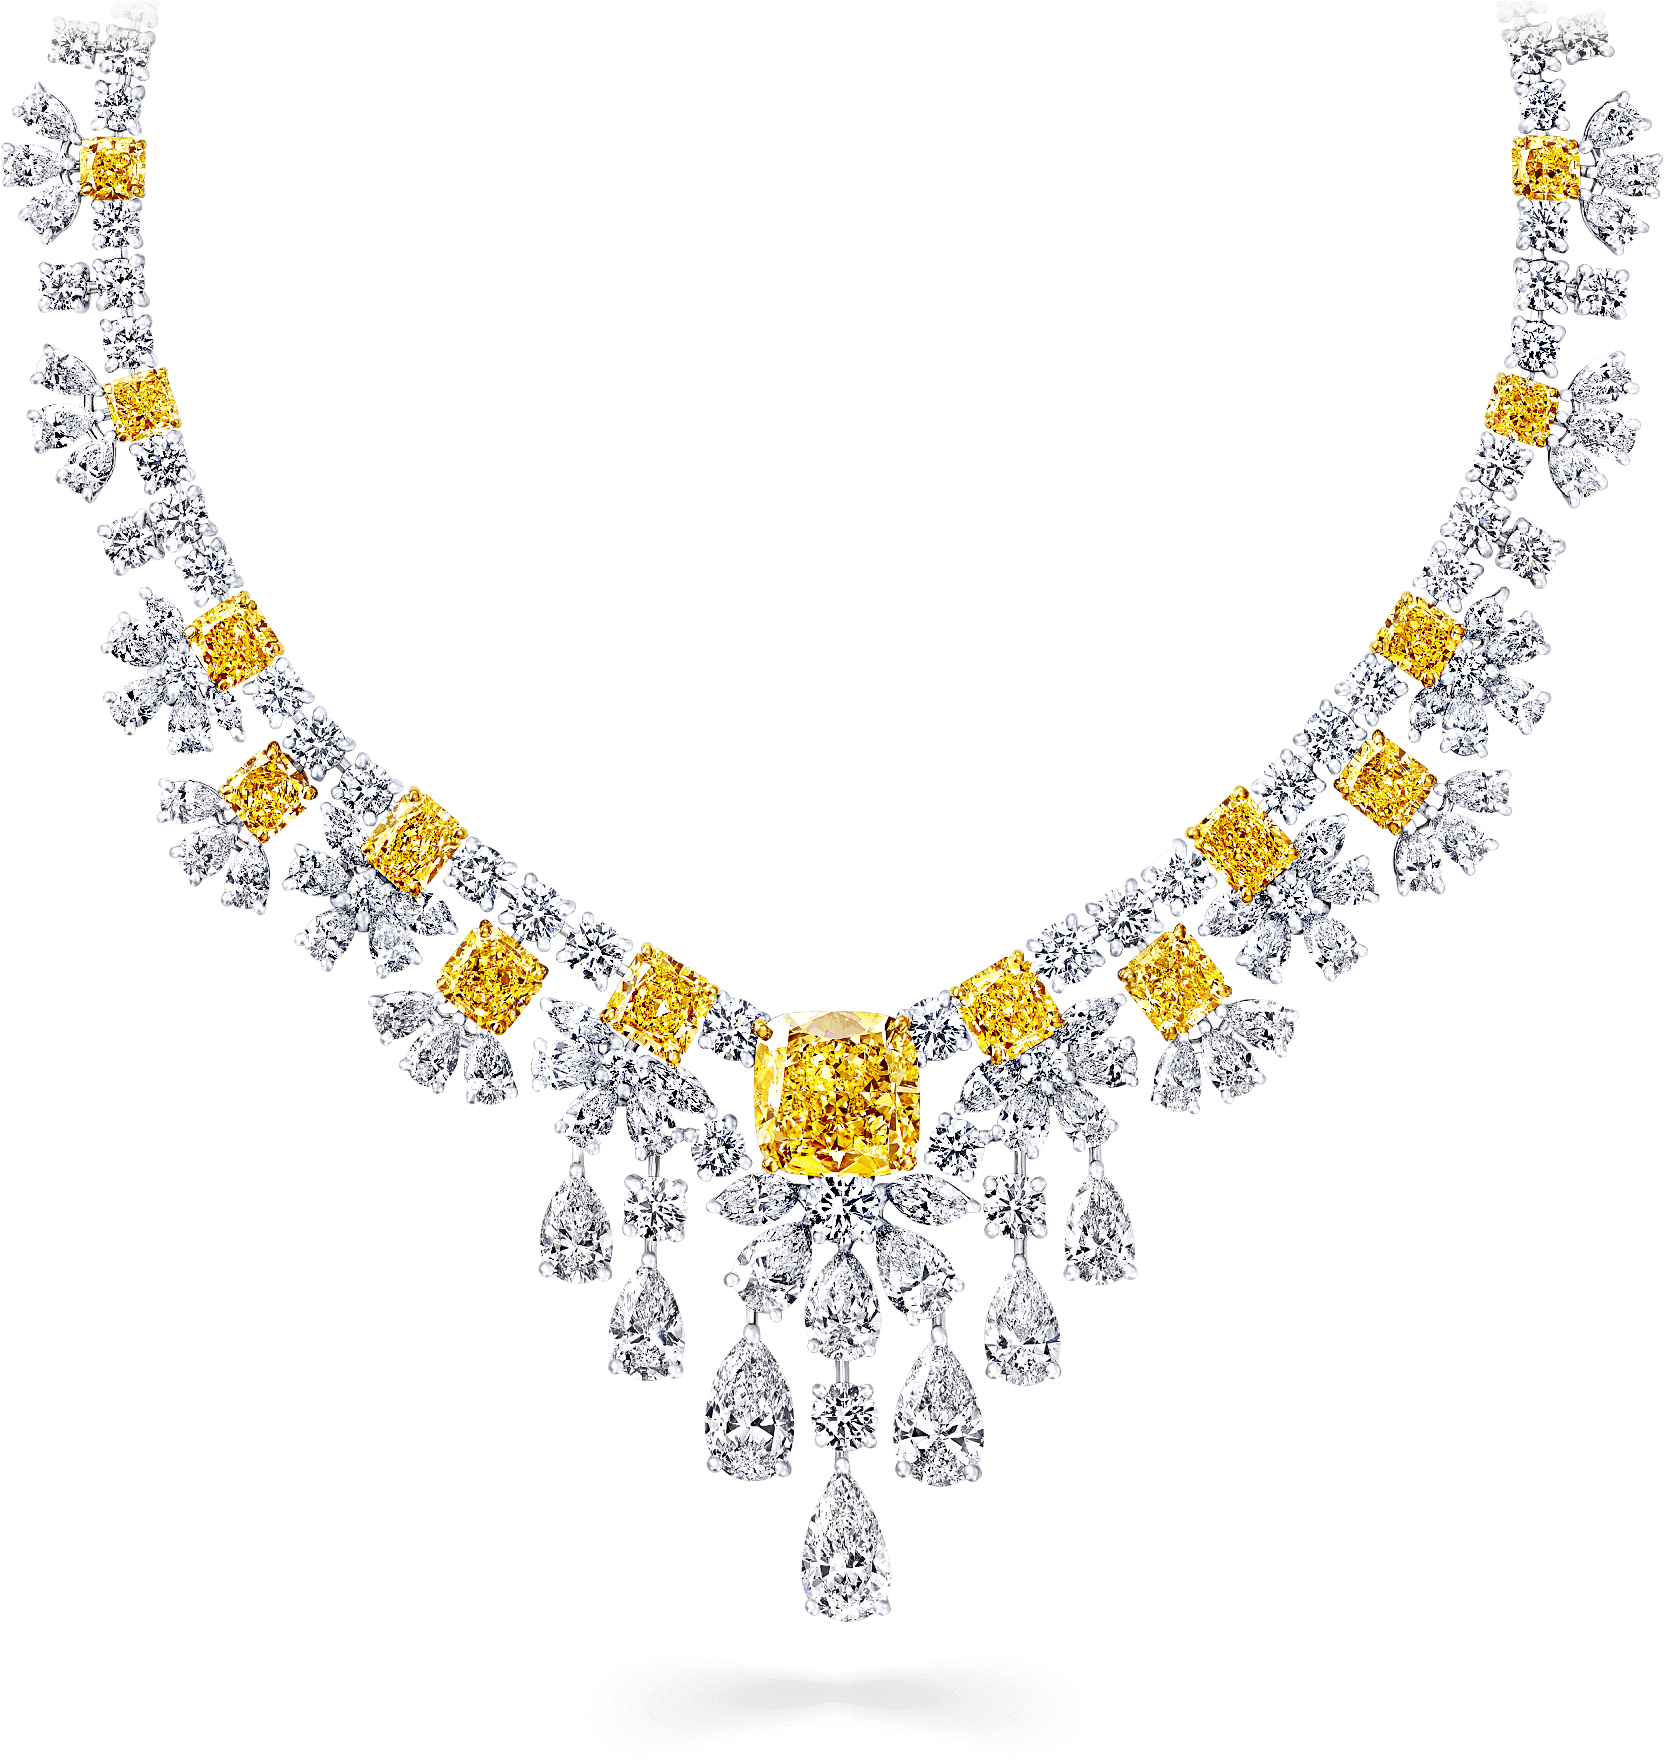 A Necklace With Diamonds And Yellow And White Stones